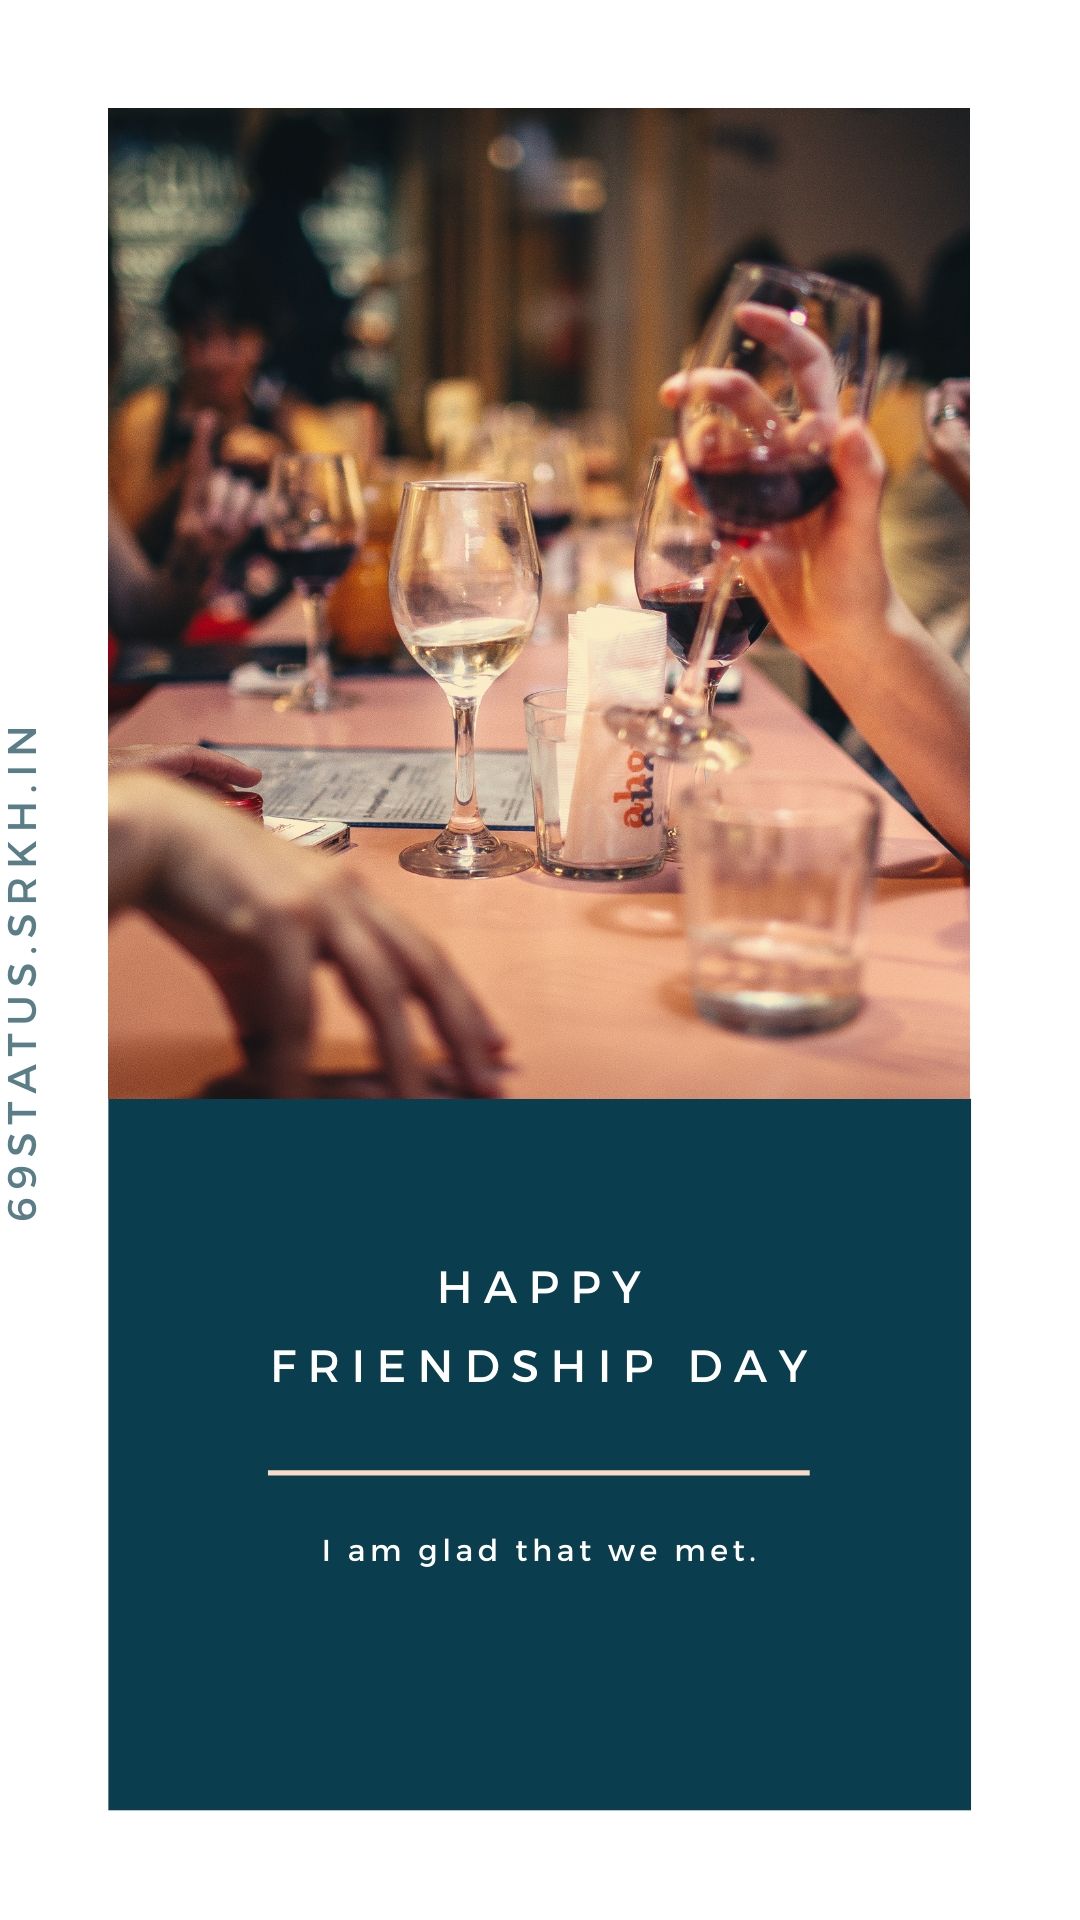 Friendship Day Images for WhatsApp HD